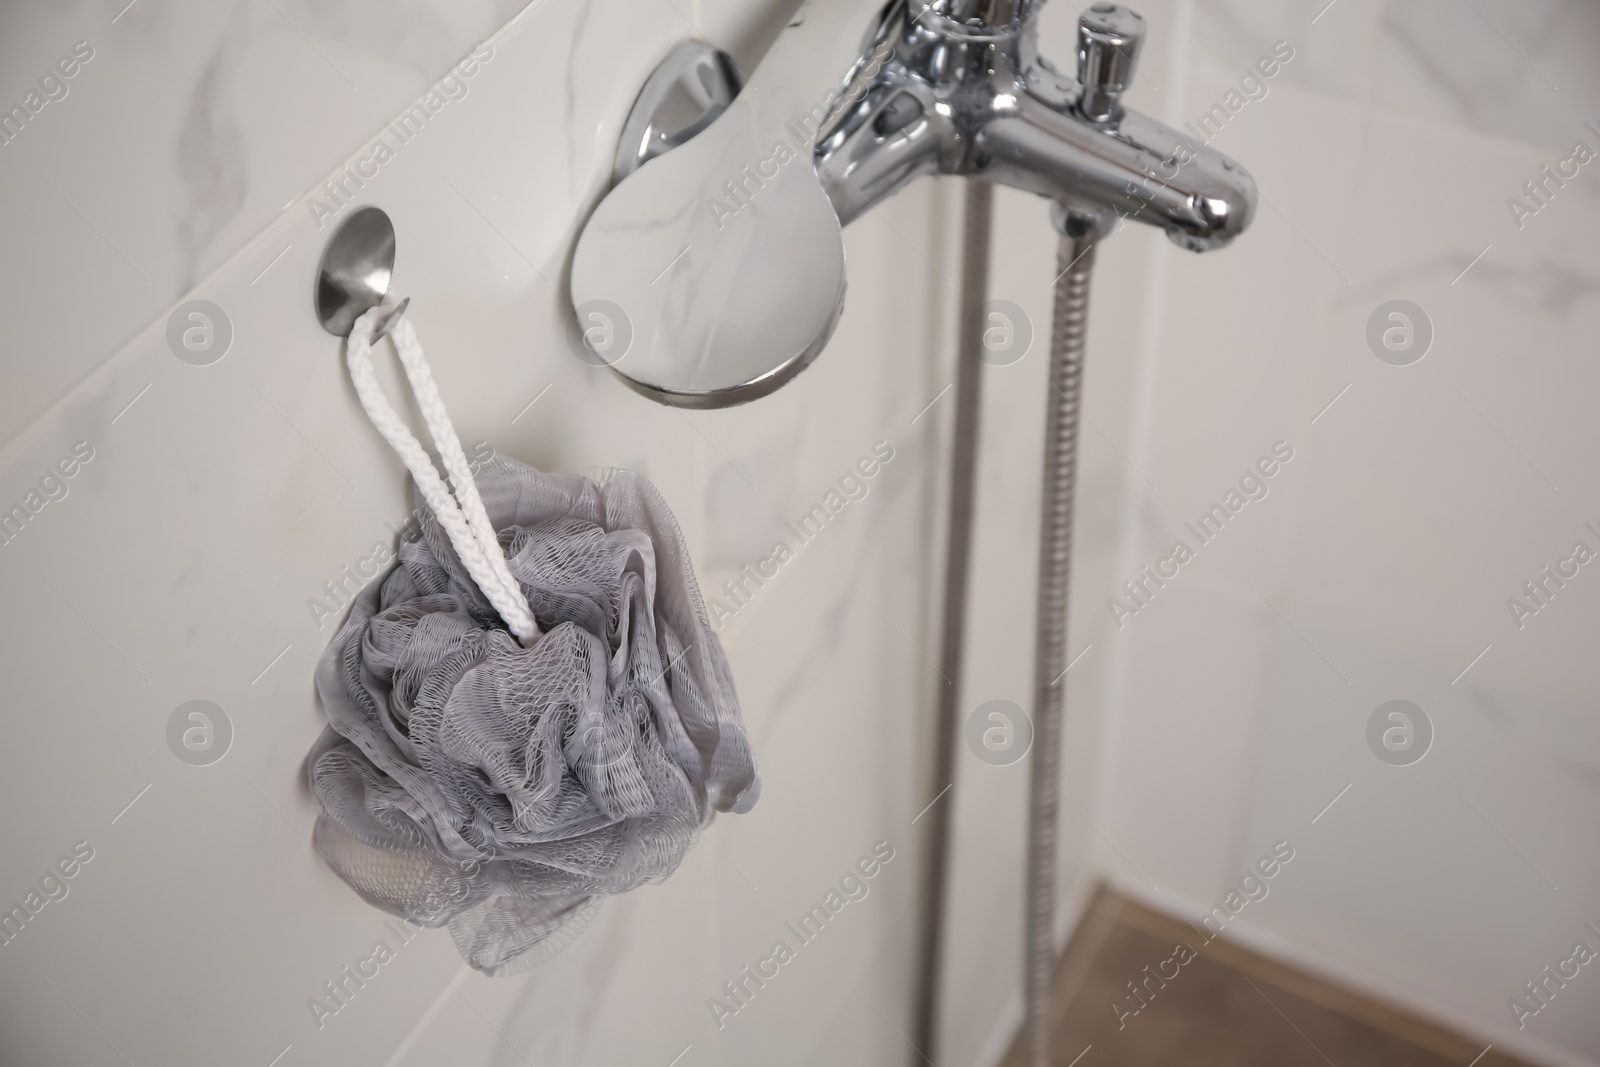 Photo of Grey shower puff hanging near faucet in bathroom, above view